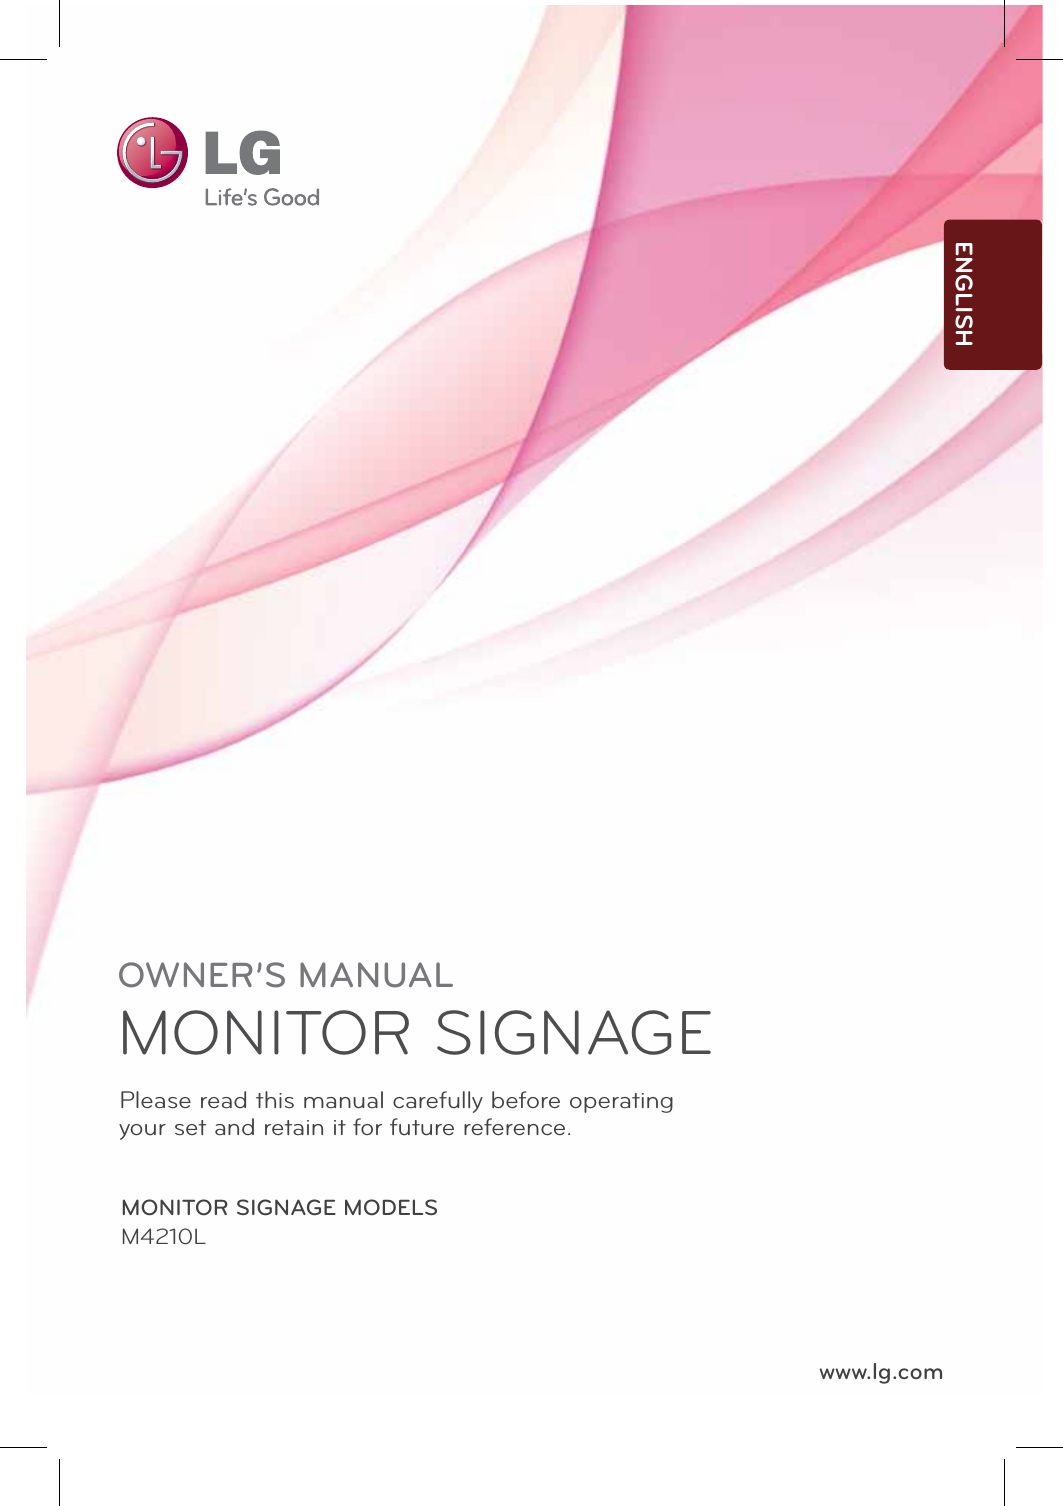 OWNER’S MANUALMONITOR SIGNAGE MONITOR SIGNAGE MODELSM4210Lwww.lg.comPlease read this manual carefully before operatingyour set and retain it for future reference.ENGLISH